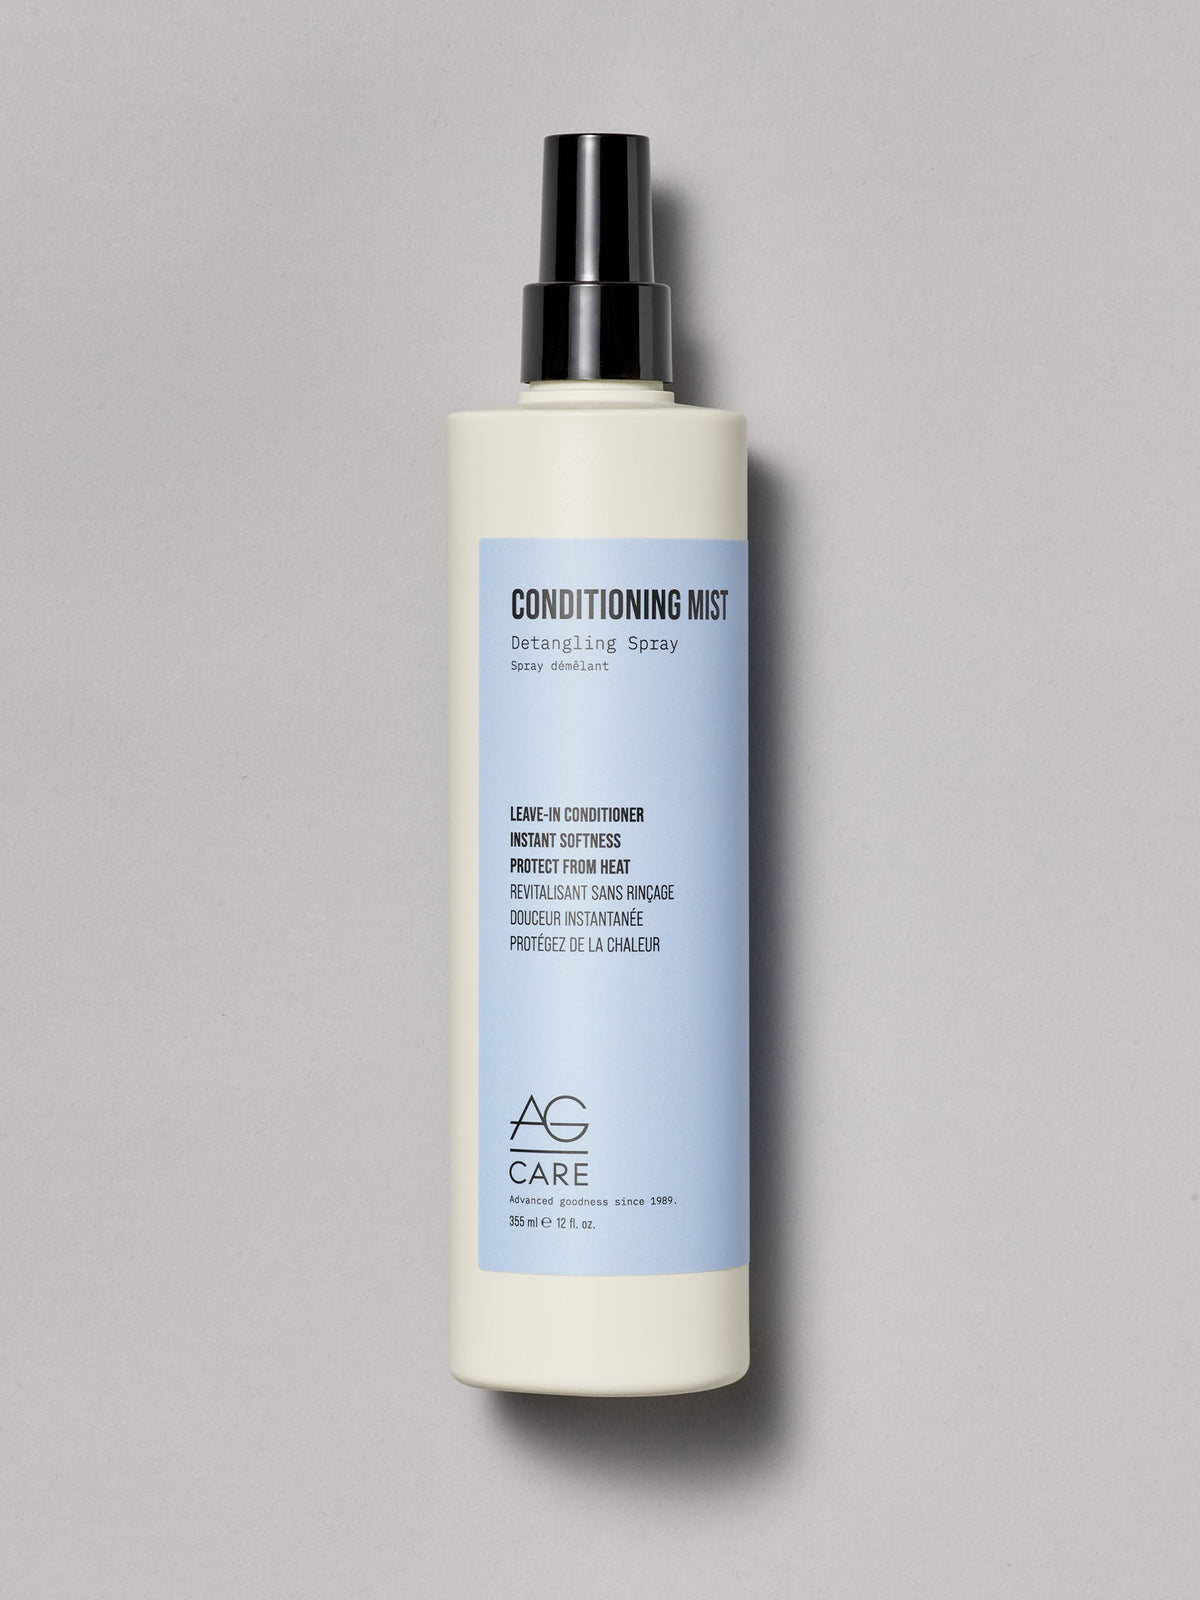 CONDITIONING MIST Detangling Spray - by AG Hair |ProCare Outlet|